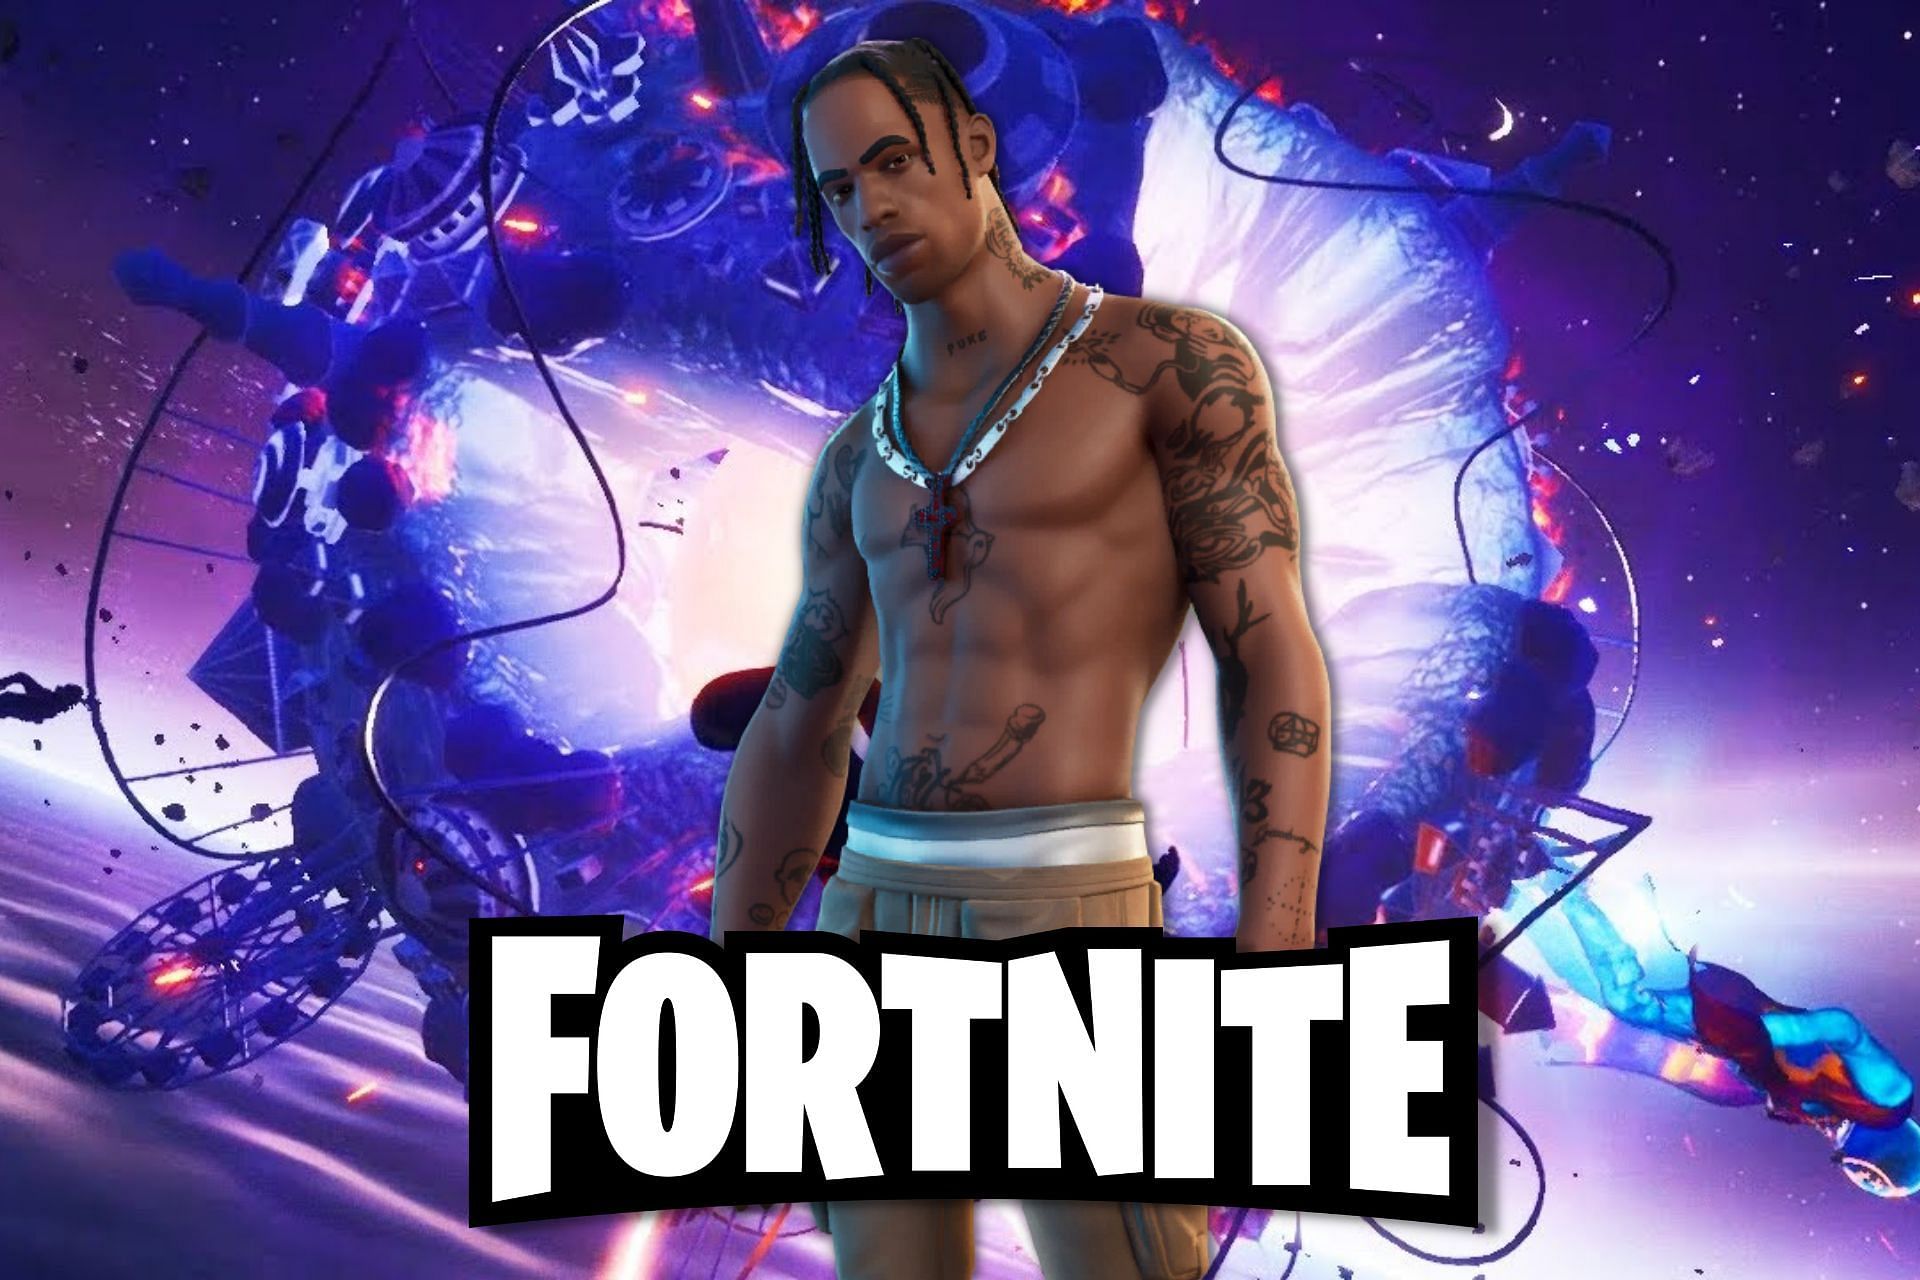 Travis Scott might return to Fortnite with another Astroworld concert (Image via Sportskeeda)